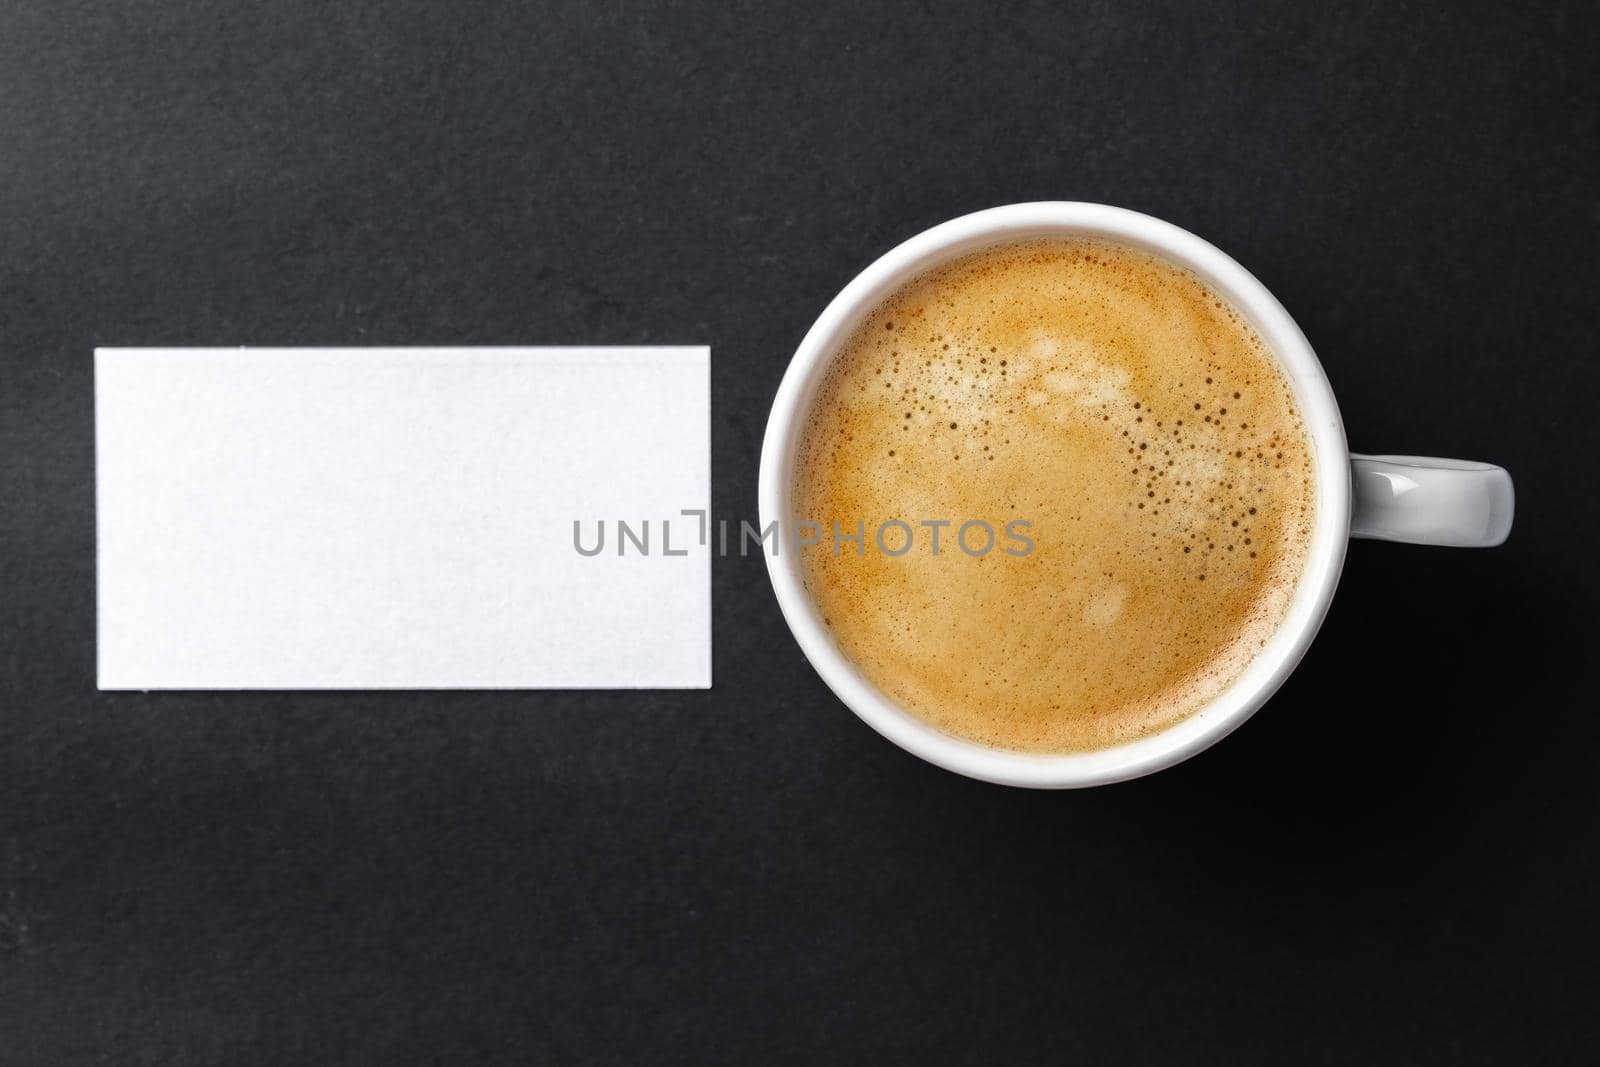 Top view of cup with espresso and white business card template on black table